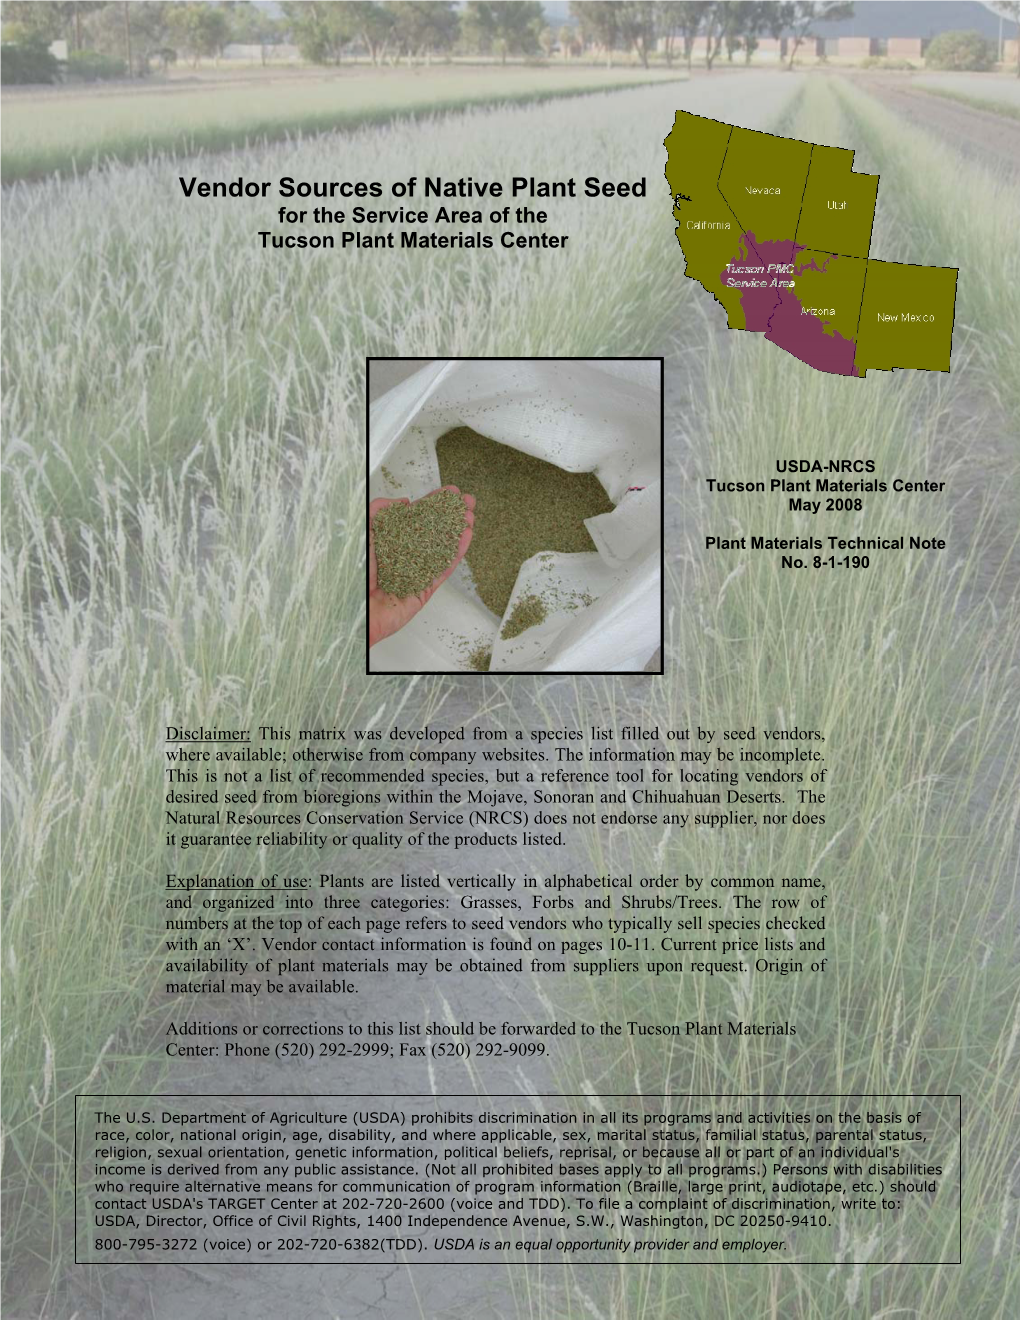 Vendor Sources of Native Plant Seed for the Service Area of the Tucson Plant Materials Center